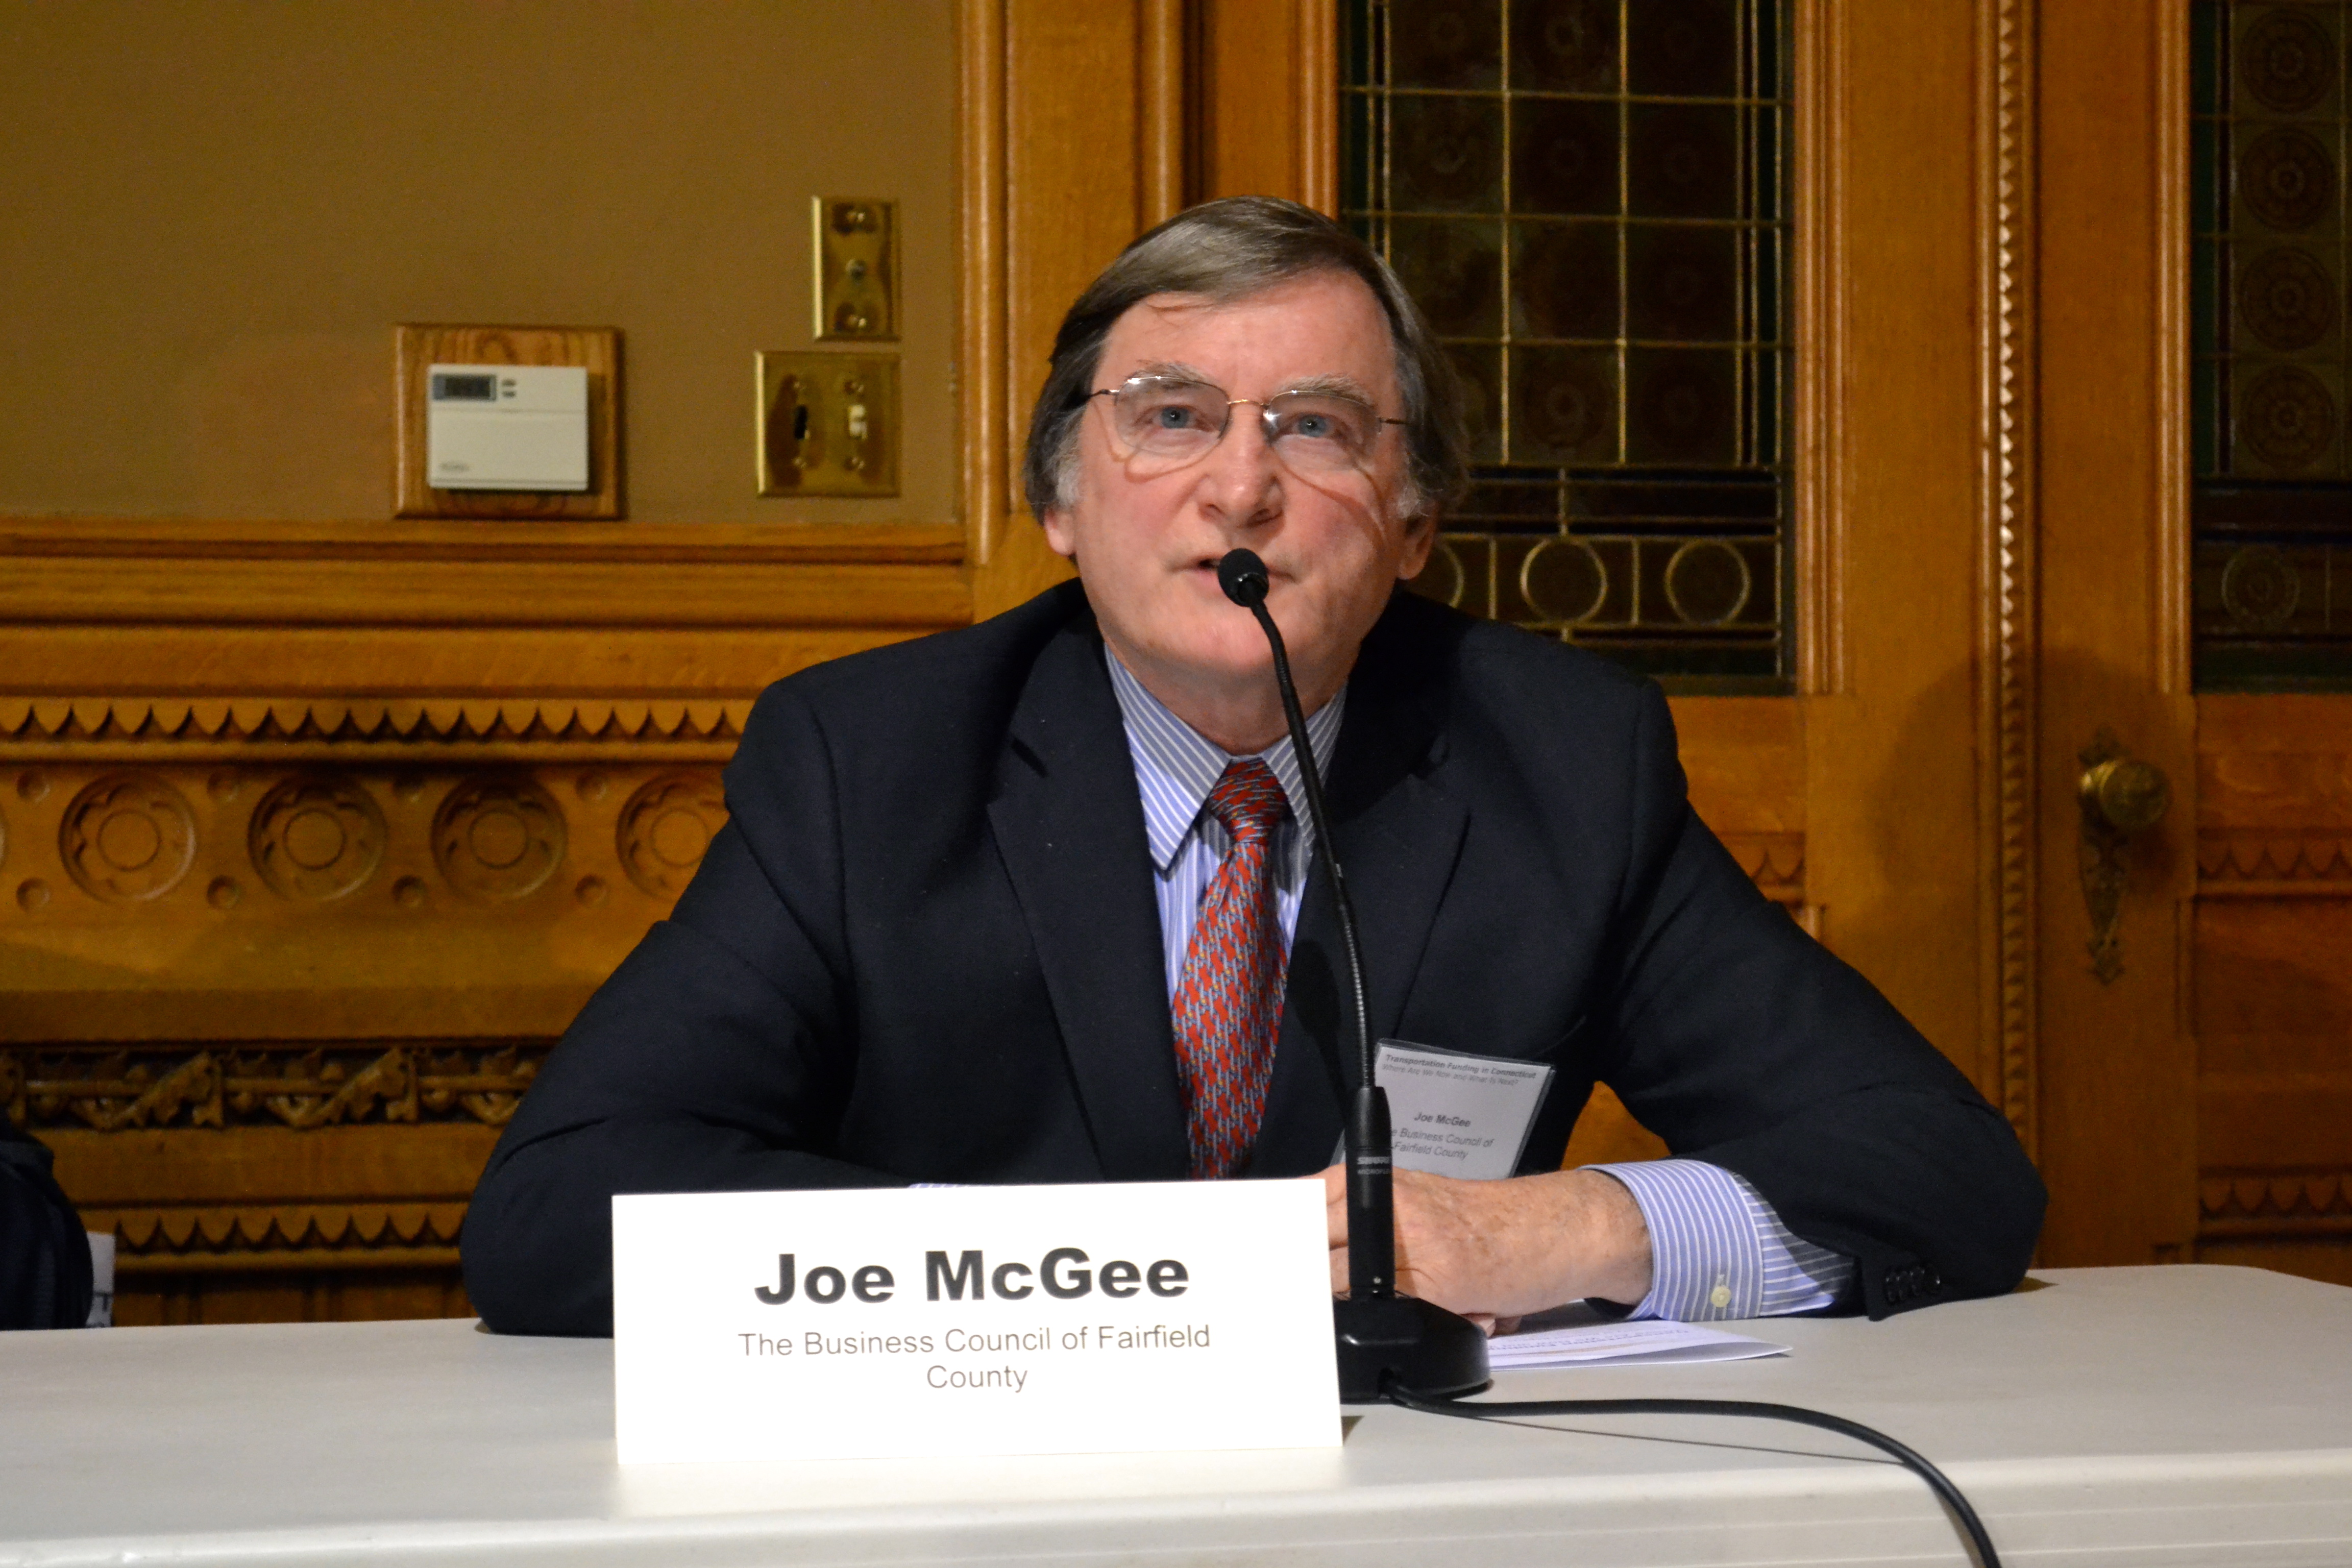 Joe McGee of The Business Council of Fairfield County